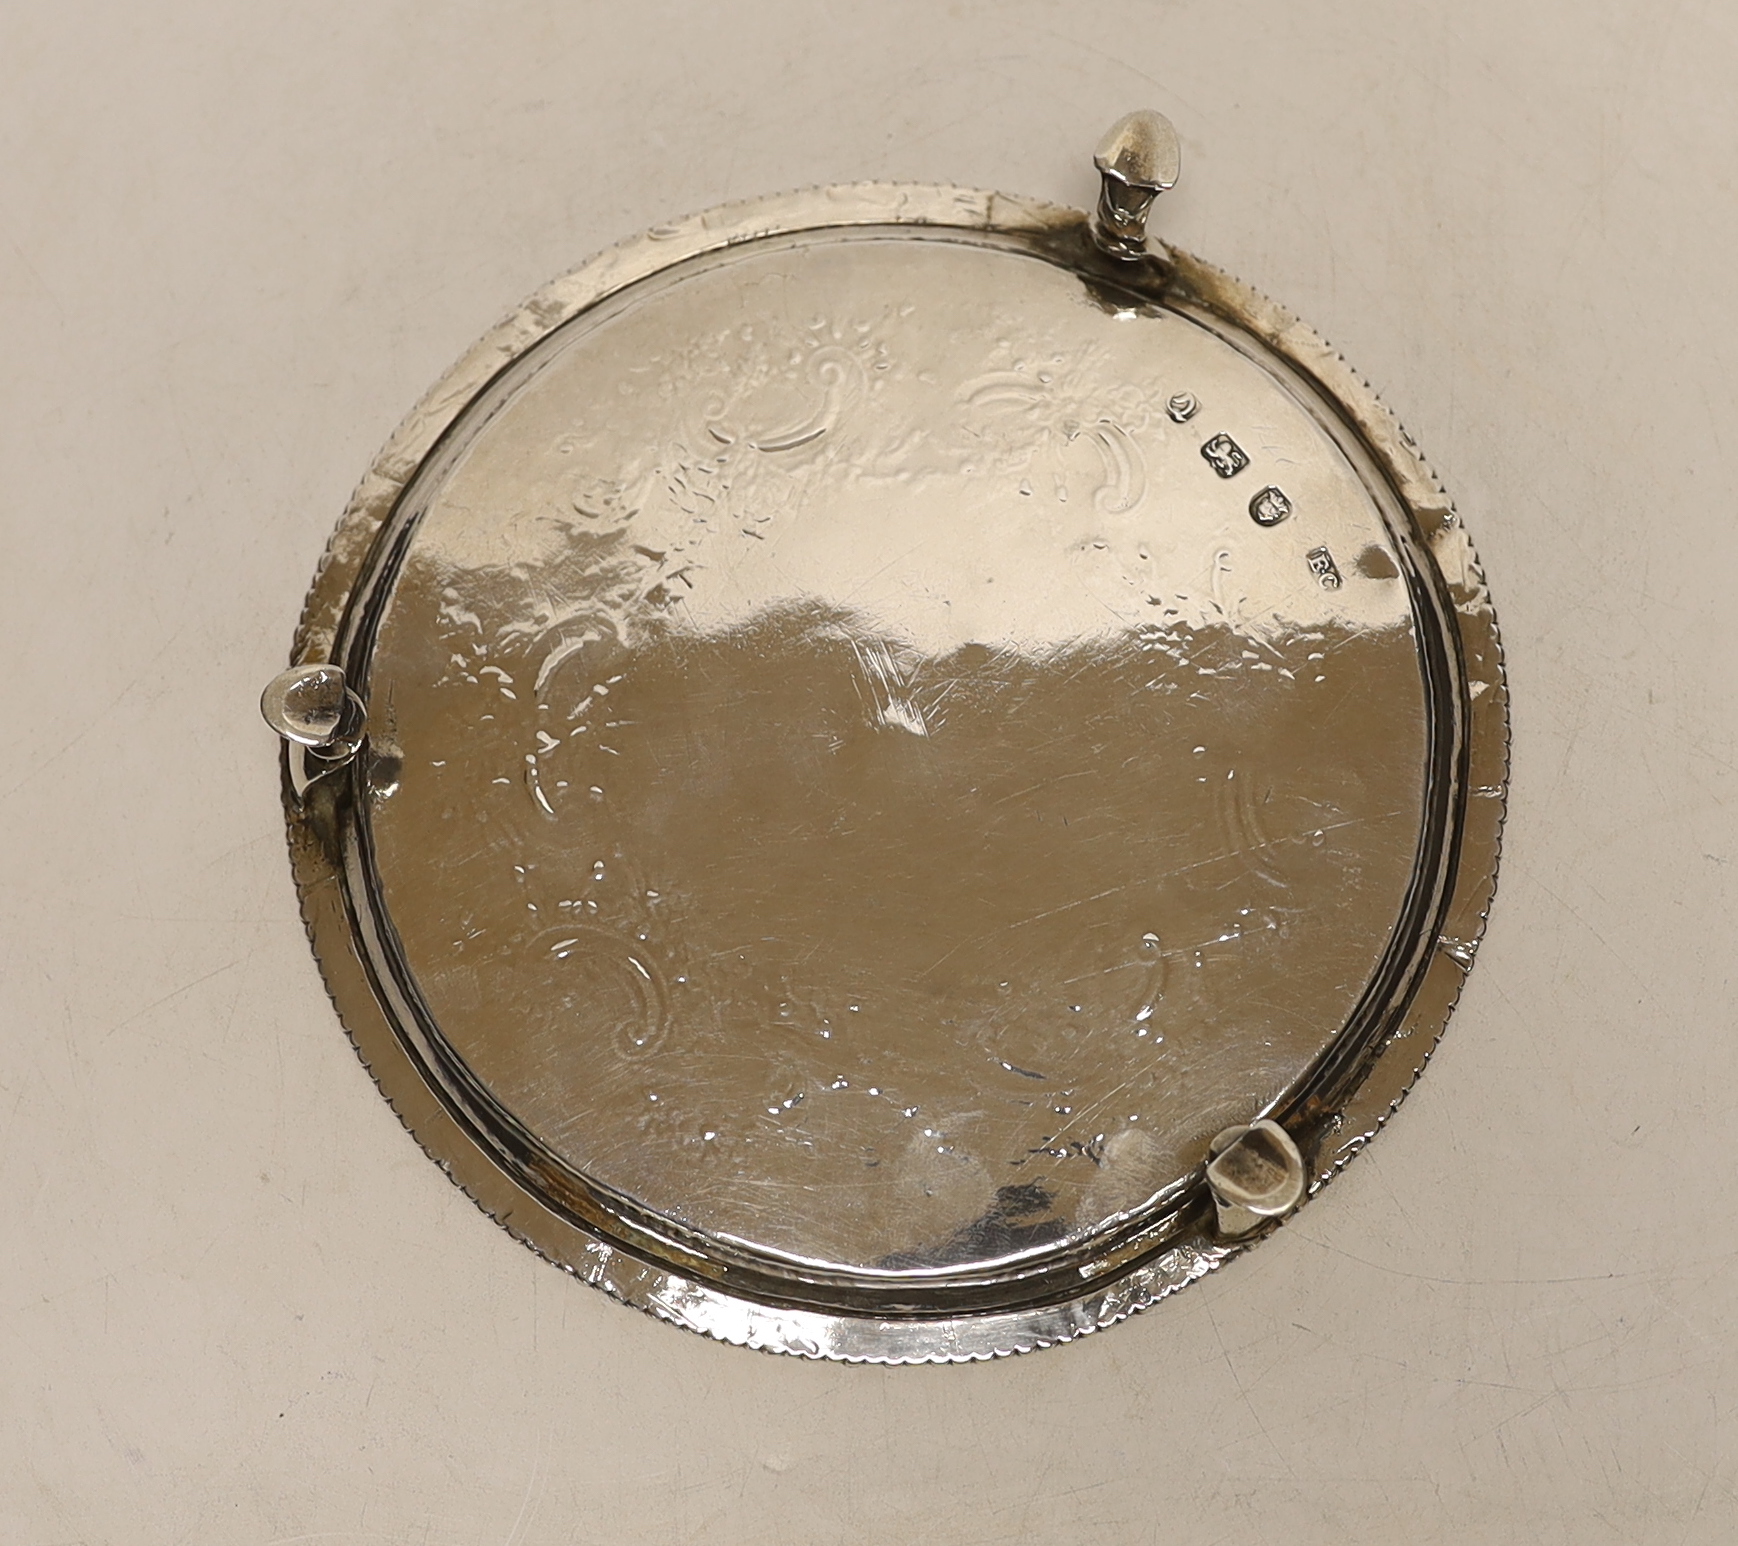 A George III silver waiter by Ebenezer Coker, London, 1771, with later engraved decoration, 15.2cm, 6.4oz.